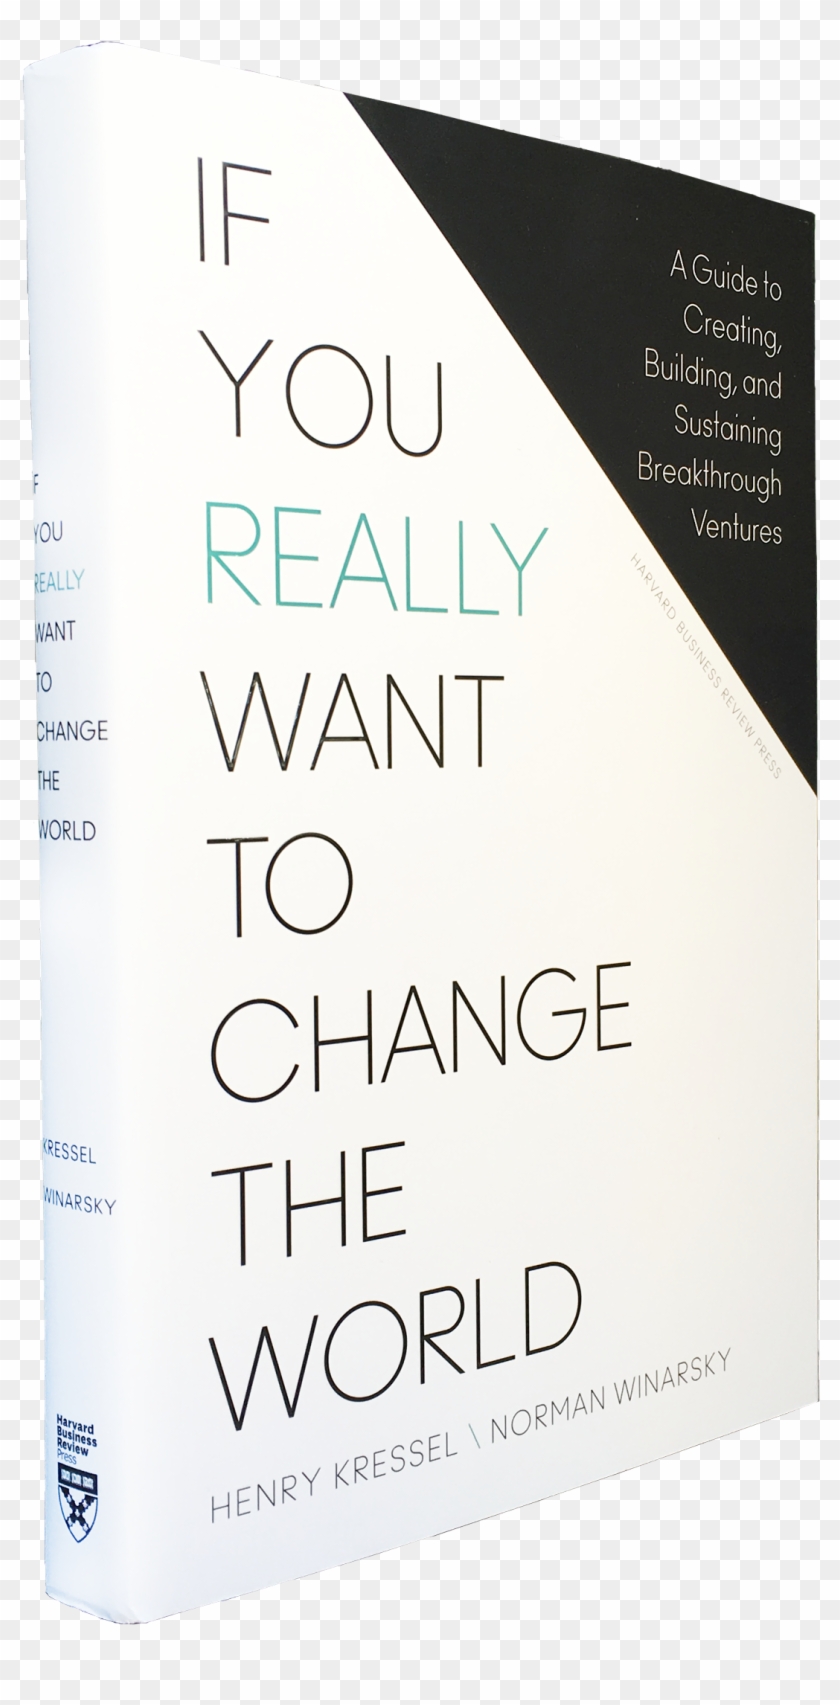 If You Really Want To Change The World Book Cover - Change Book Cover Clipart #5093696